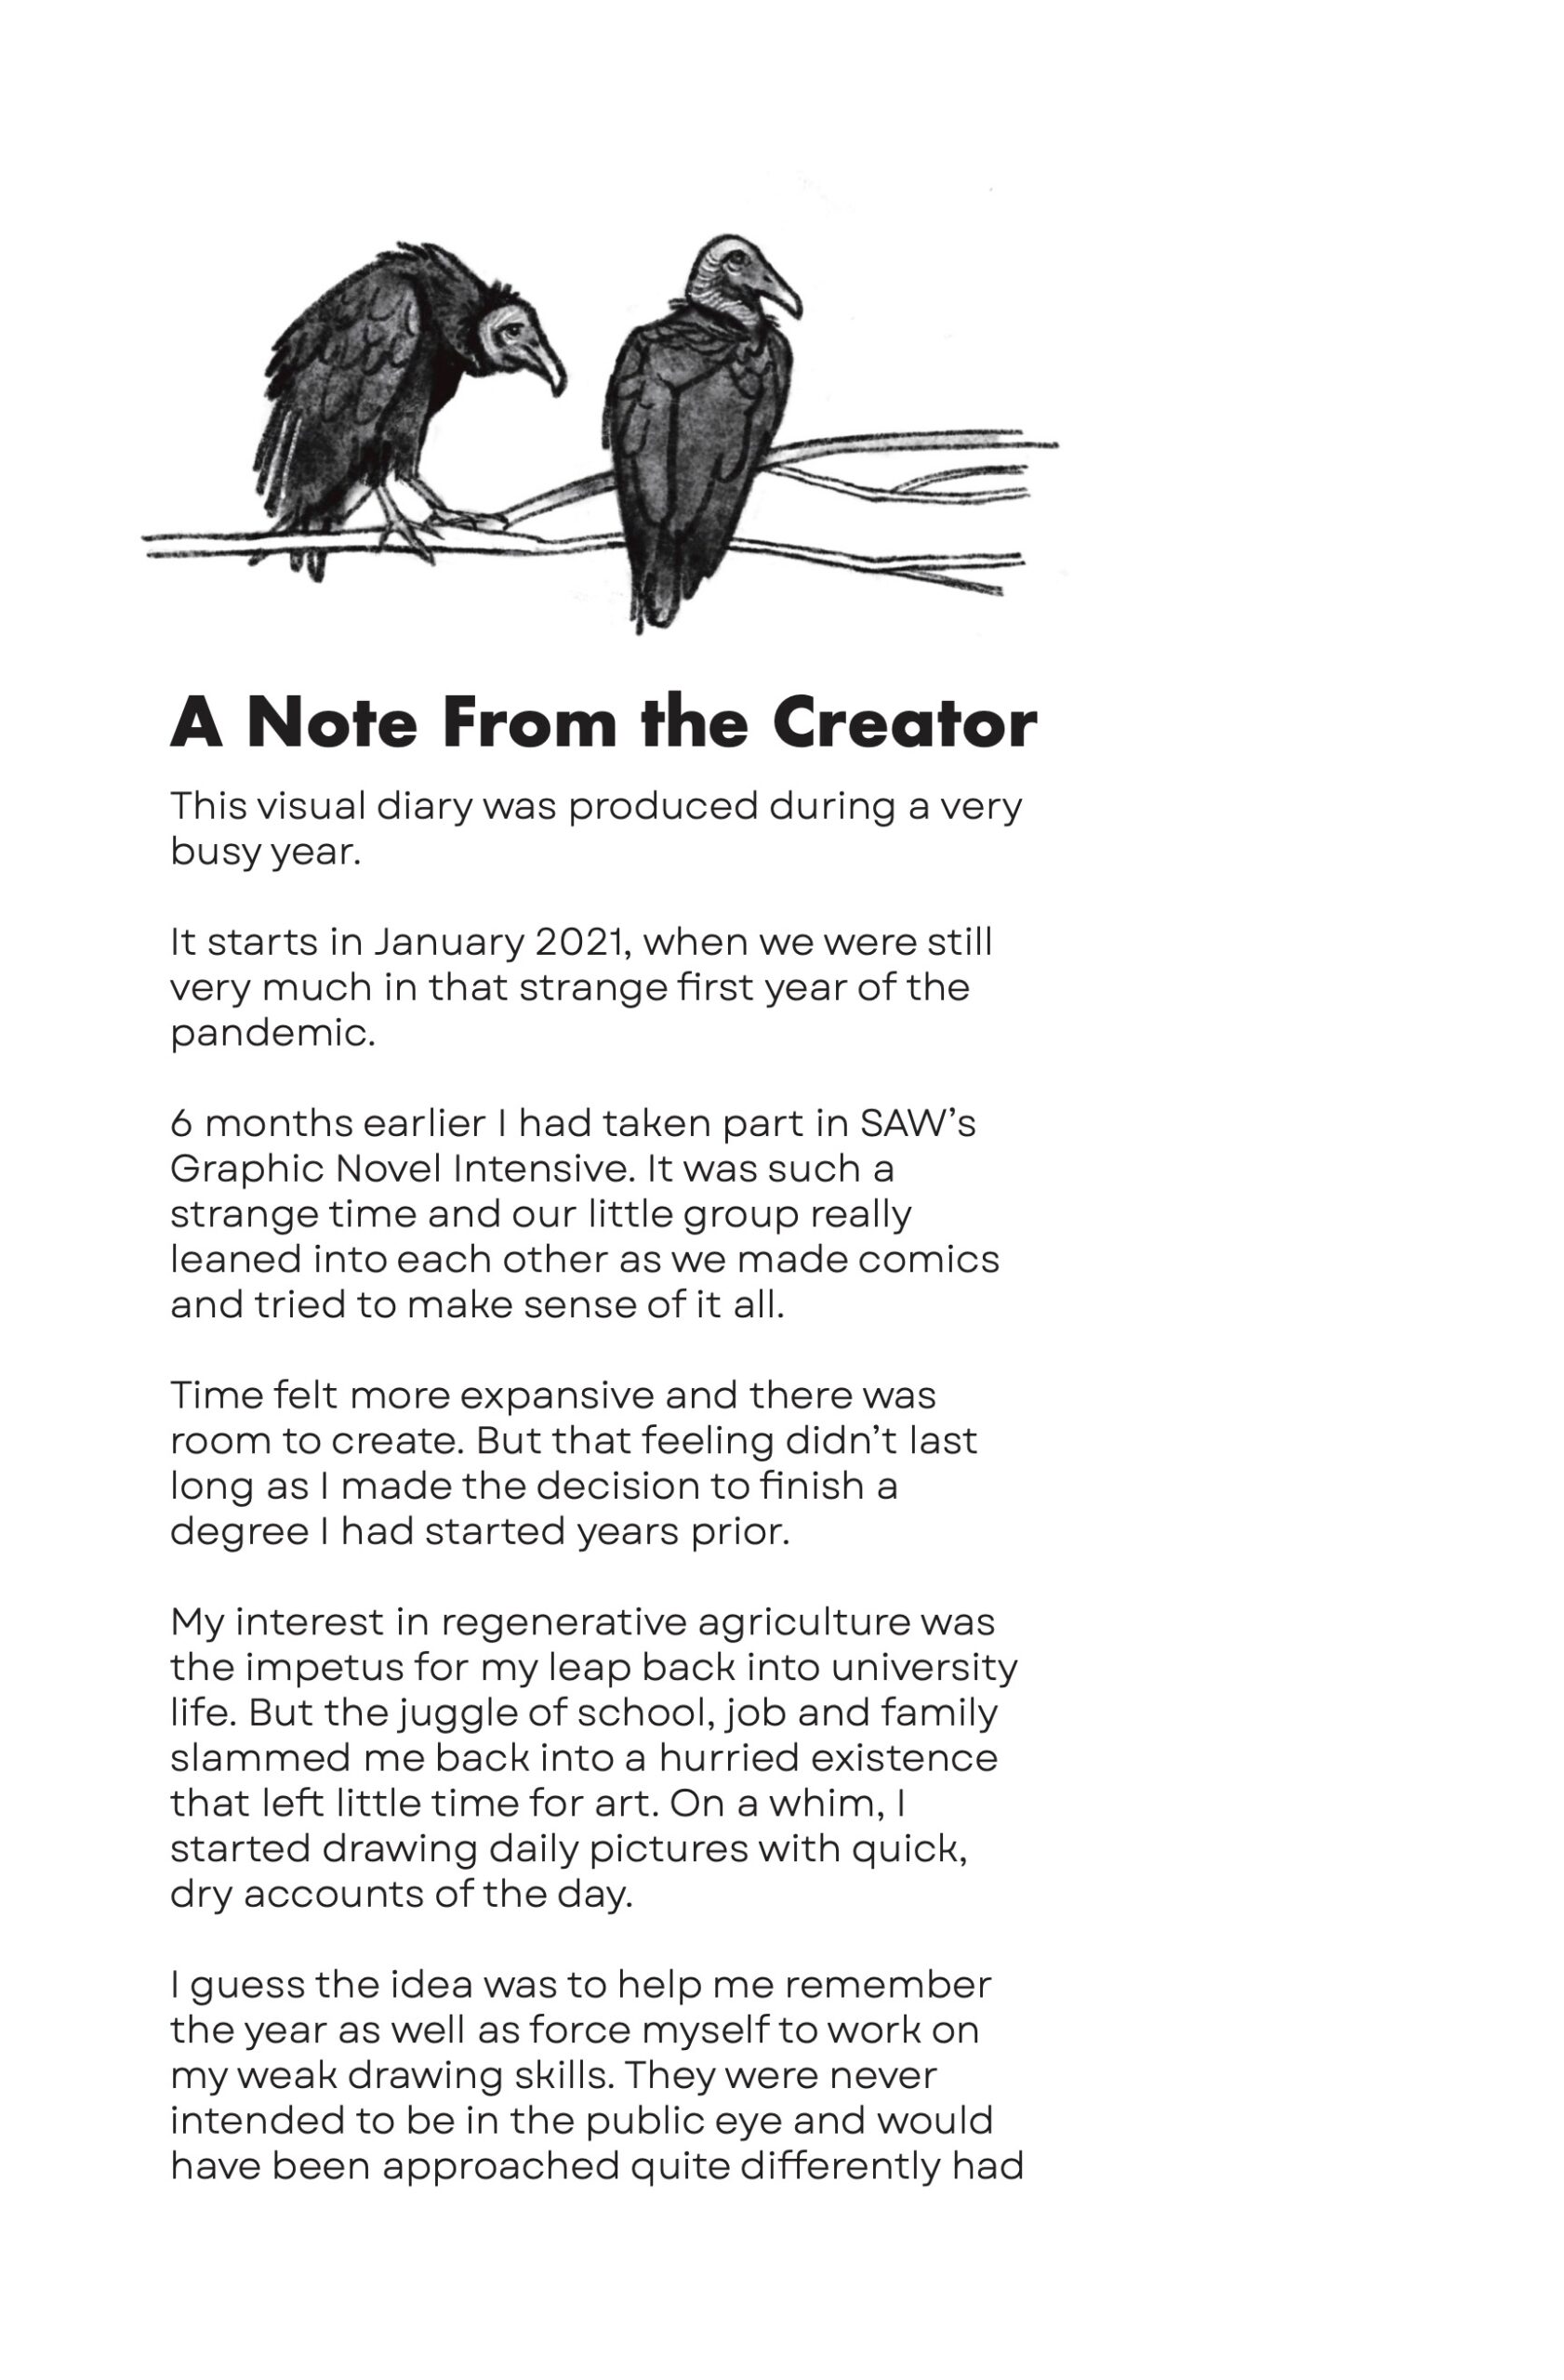 Two vultures are perched atop a branch running horizontally across the page, above the author note:

"A Note From the Creator
This visual diary was produced during a very busy year.

It starts in January 2021, when we were still very much in that strange first year of the pandemic.

6 months earlier I had taken part in SAWâ€™s Graphic Novel Intensive. It was such a strange time and our little group really leaned into each other as we made comics and tried to make sense of it all.

Time felt more expansive and there was room to create. But that feeling didnâ€™t last long as I made the decision to finish a degree I had started years prior.

My interest in regenerative agriculture was the impetus for my leap back into university life. But the juggle of school, job and family slammed me back into a hurried existence that left little time for art. On a whim, I started drawing daily pictures with quick, dry accounts of the day. I guess the idea was to help me remember the year as well as force myself to work on my weak drawing skills. They were never intended to be in the public eye and would have been approached quite differently hadâ€¦"